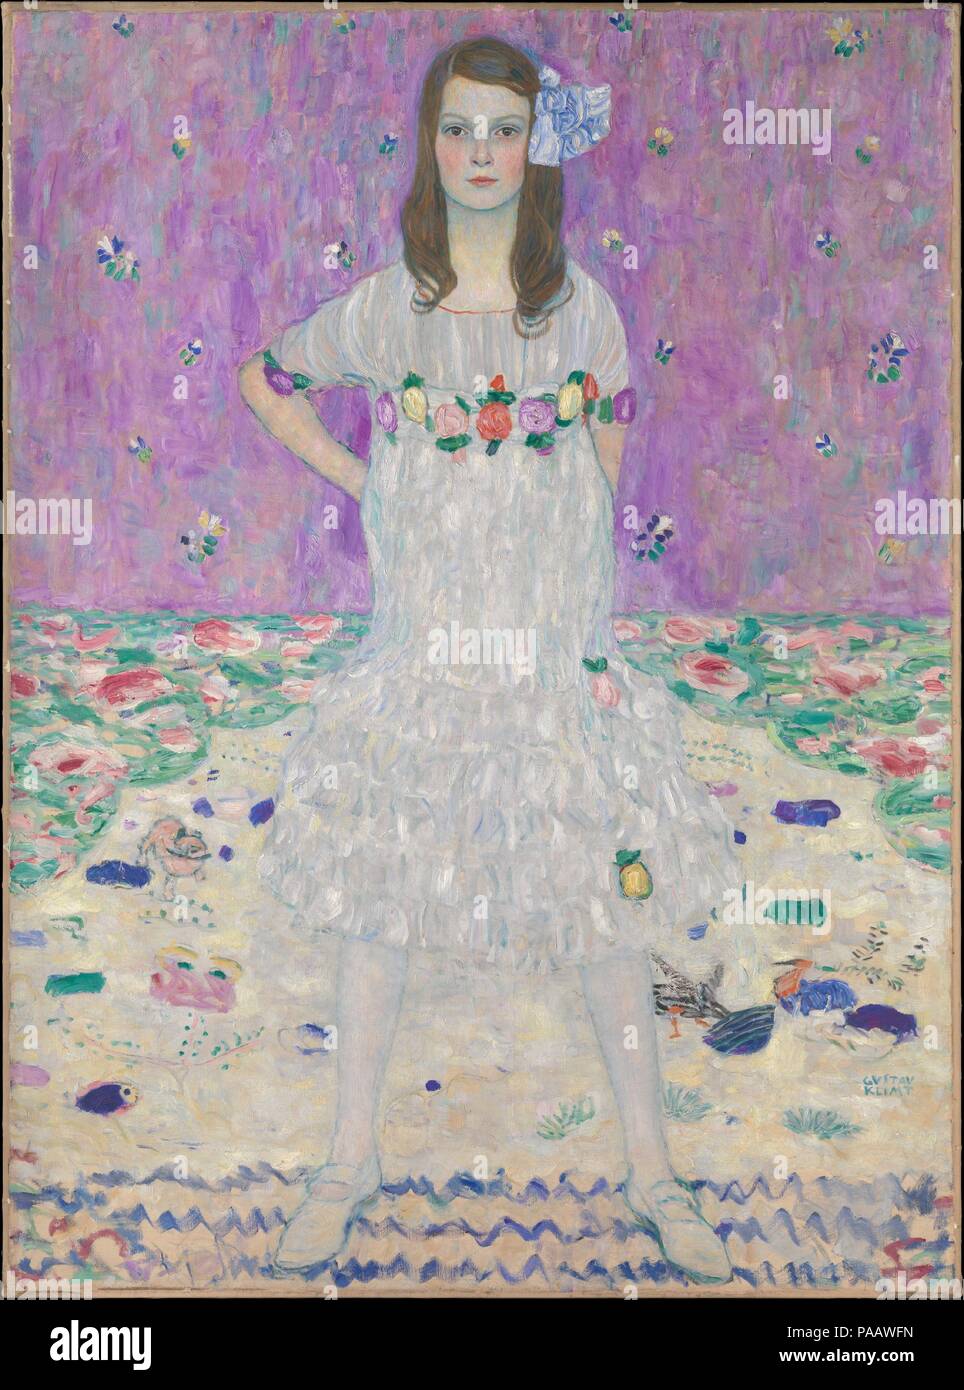 Mäda Primavesi (1903-2000). Artist: Gustav Klimt (Austrian, Baumgarten 1862-1918 Vienna). Dimensions: 59 x 43 1/2 in. (149.9 x 110.5 cm). Date: 1912-13.  Mäda Primavesi's expression and posture convey a remarkable degree of confidence for a nine-year-old girl, even one who was, by her own account, willful and a tomboy. Klimt made numerous preliminary sketches for this portrait, experimenting with different poses, outfits, and backgrounds before deciding to show Mäda standing tall in a specially-made dress amid a profusion of springlike patterns. The picture testifies to the sophisticated taste Stock Photo